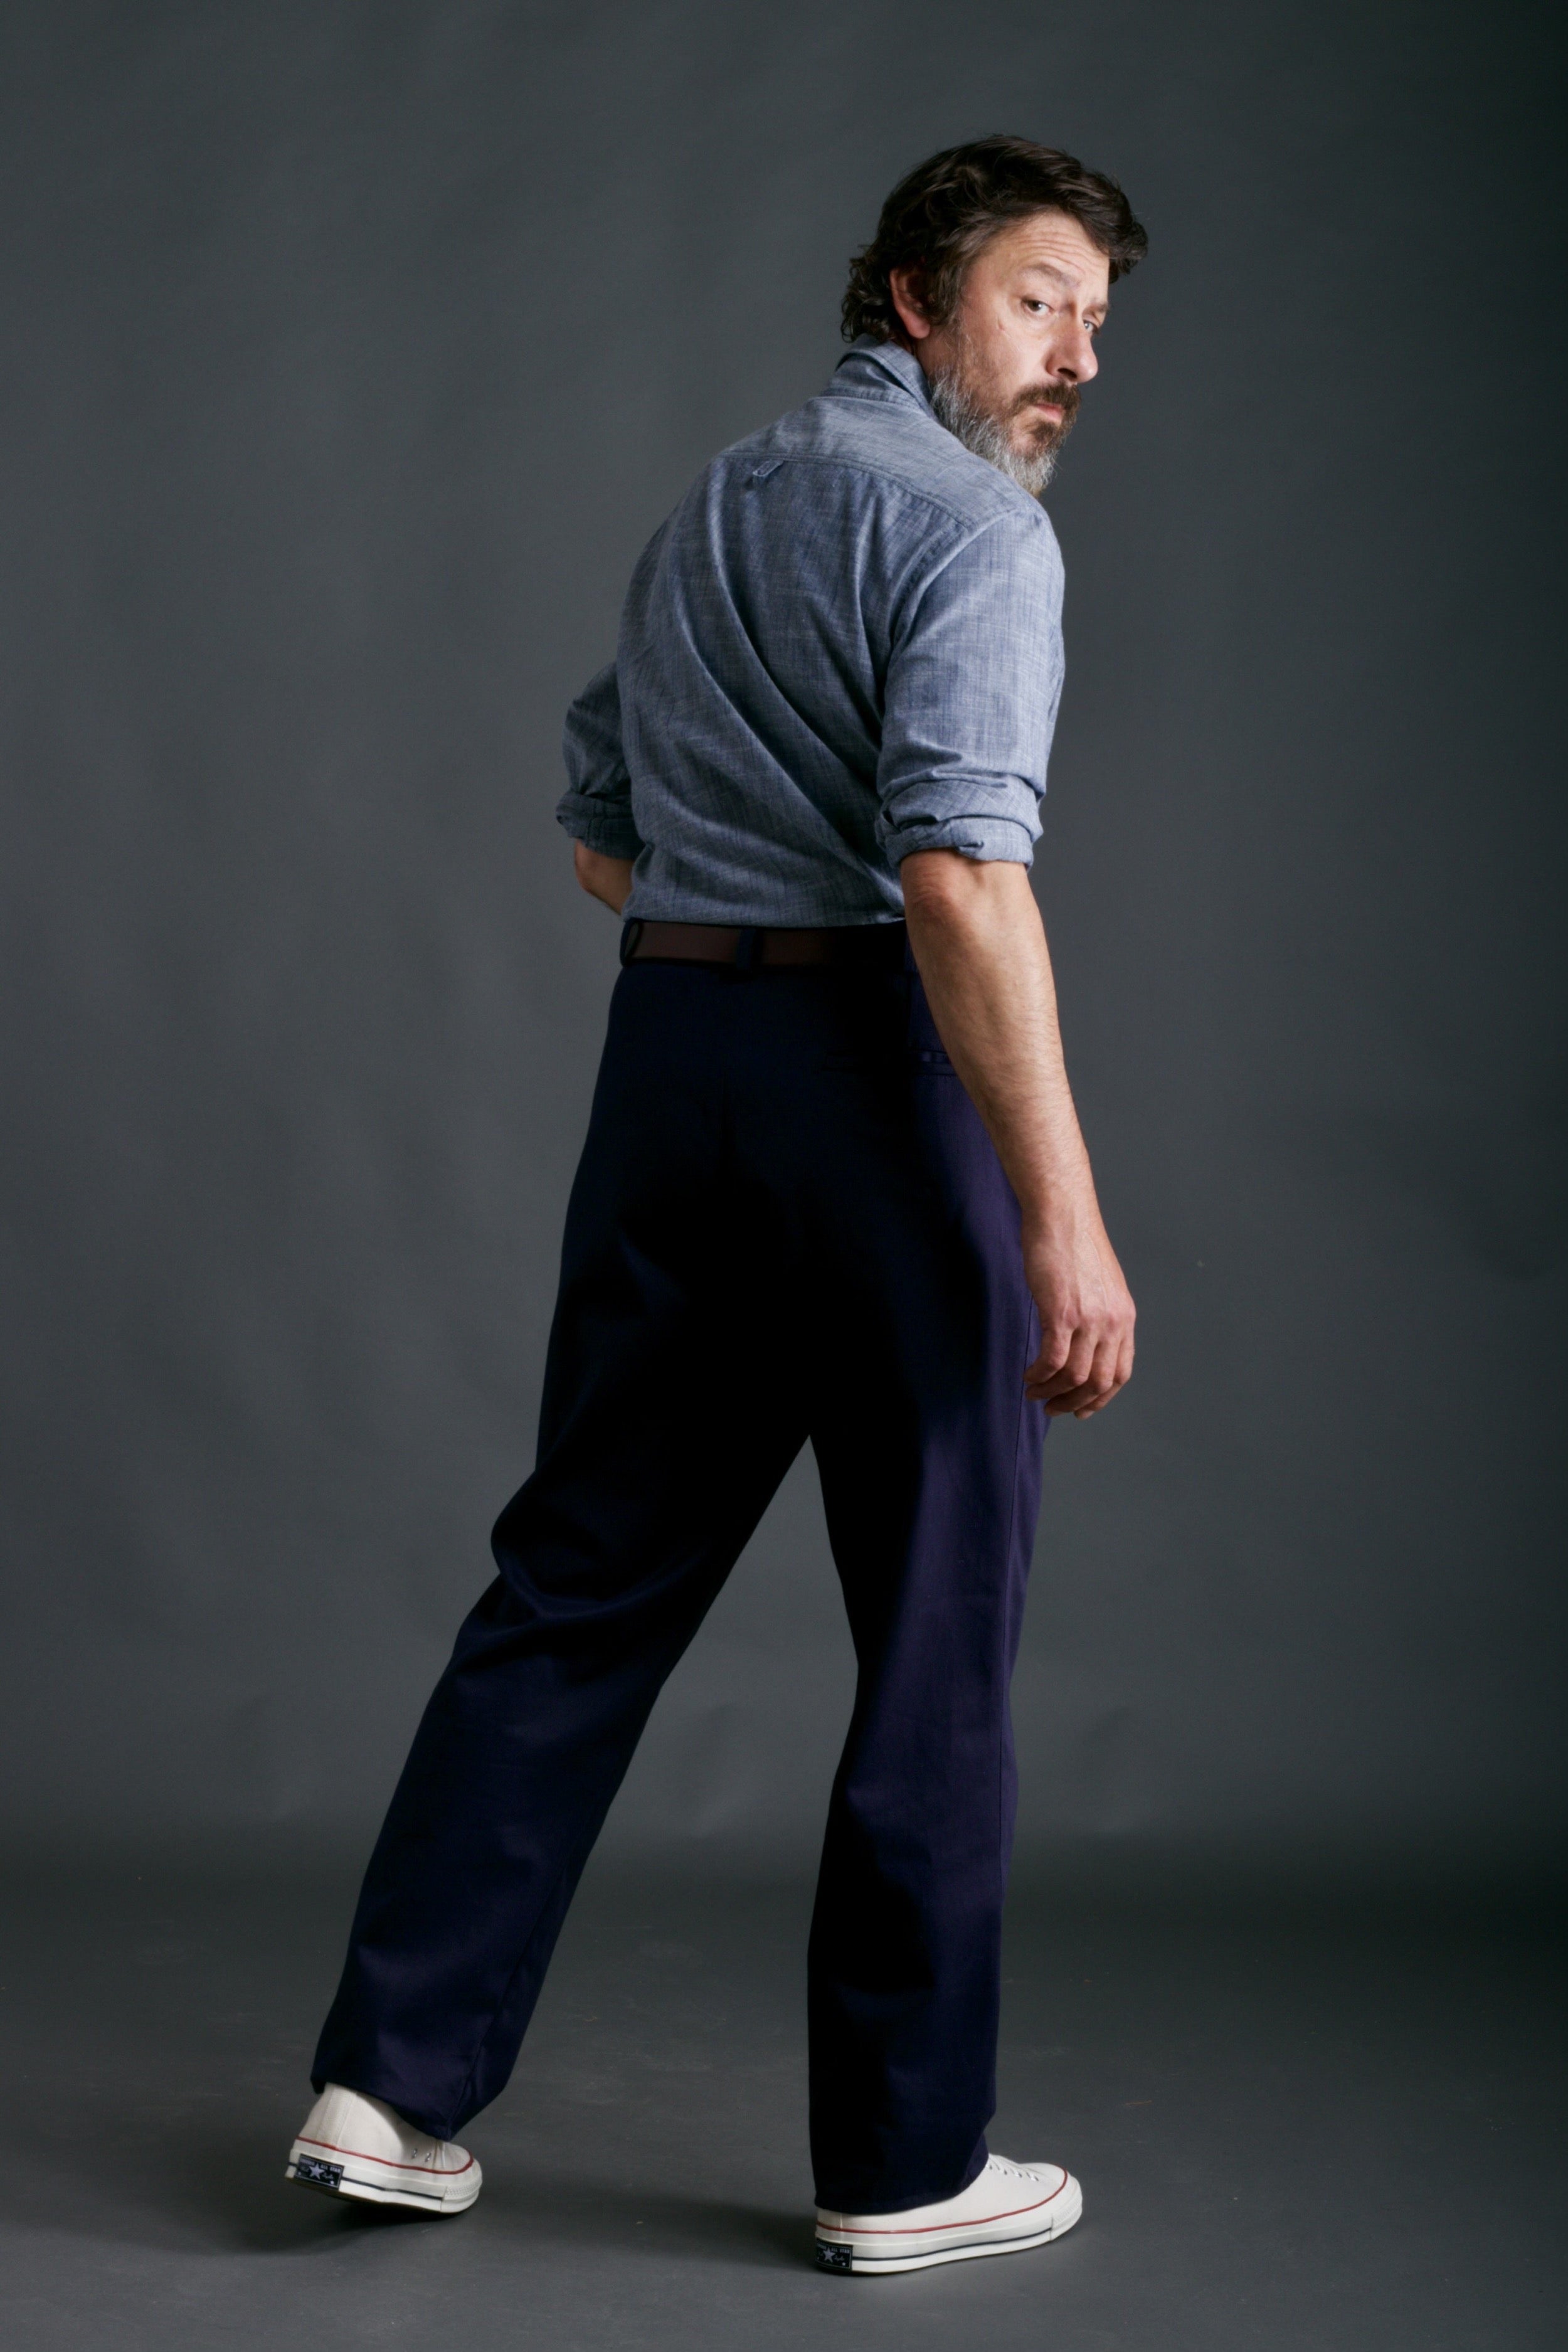 Man wears Carrier Company Classic Trouser in Navy Drill with Chambray Shirt